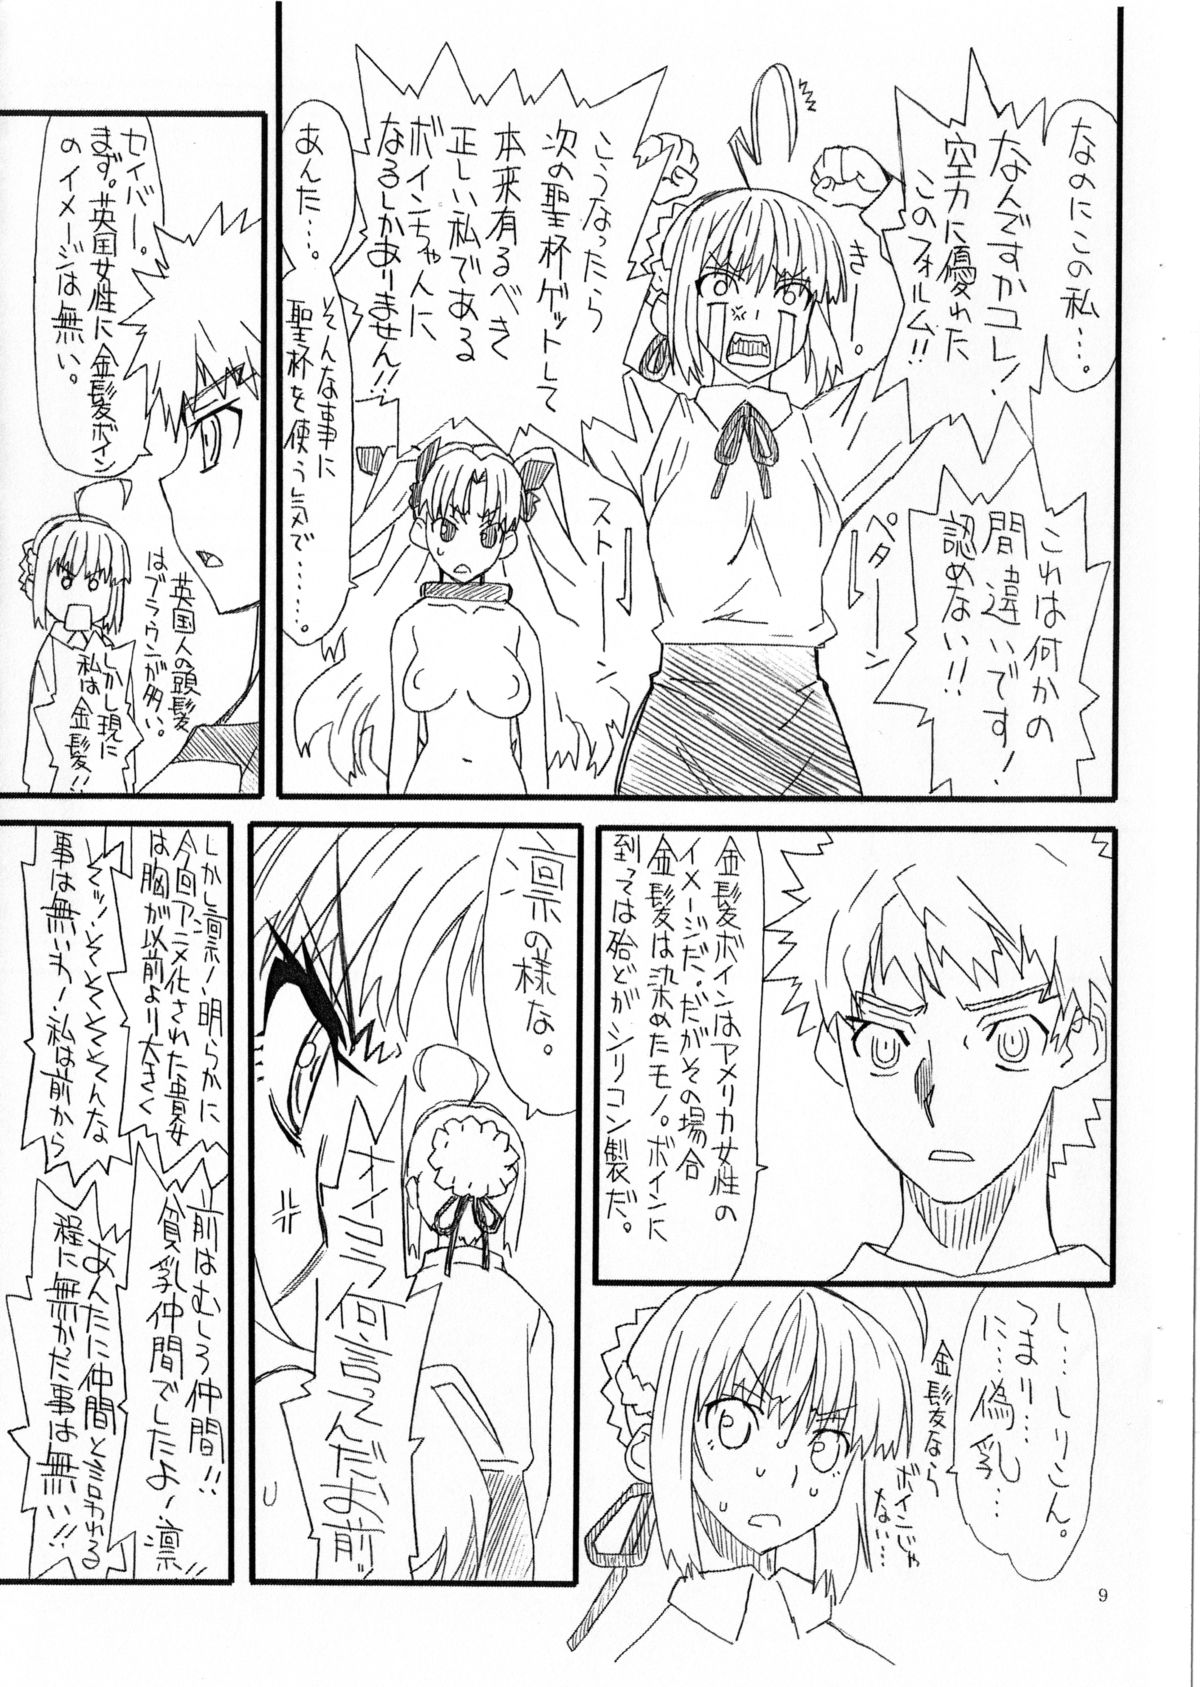 (SC65) [Power Slide (Uttorikun)] Rin to saber 1st Ver0.5 (Fate/stay night) page 10 full